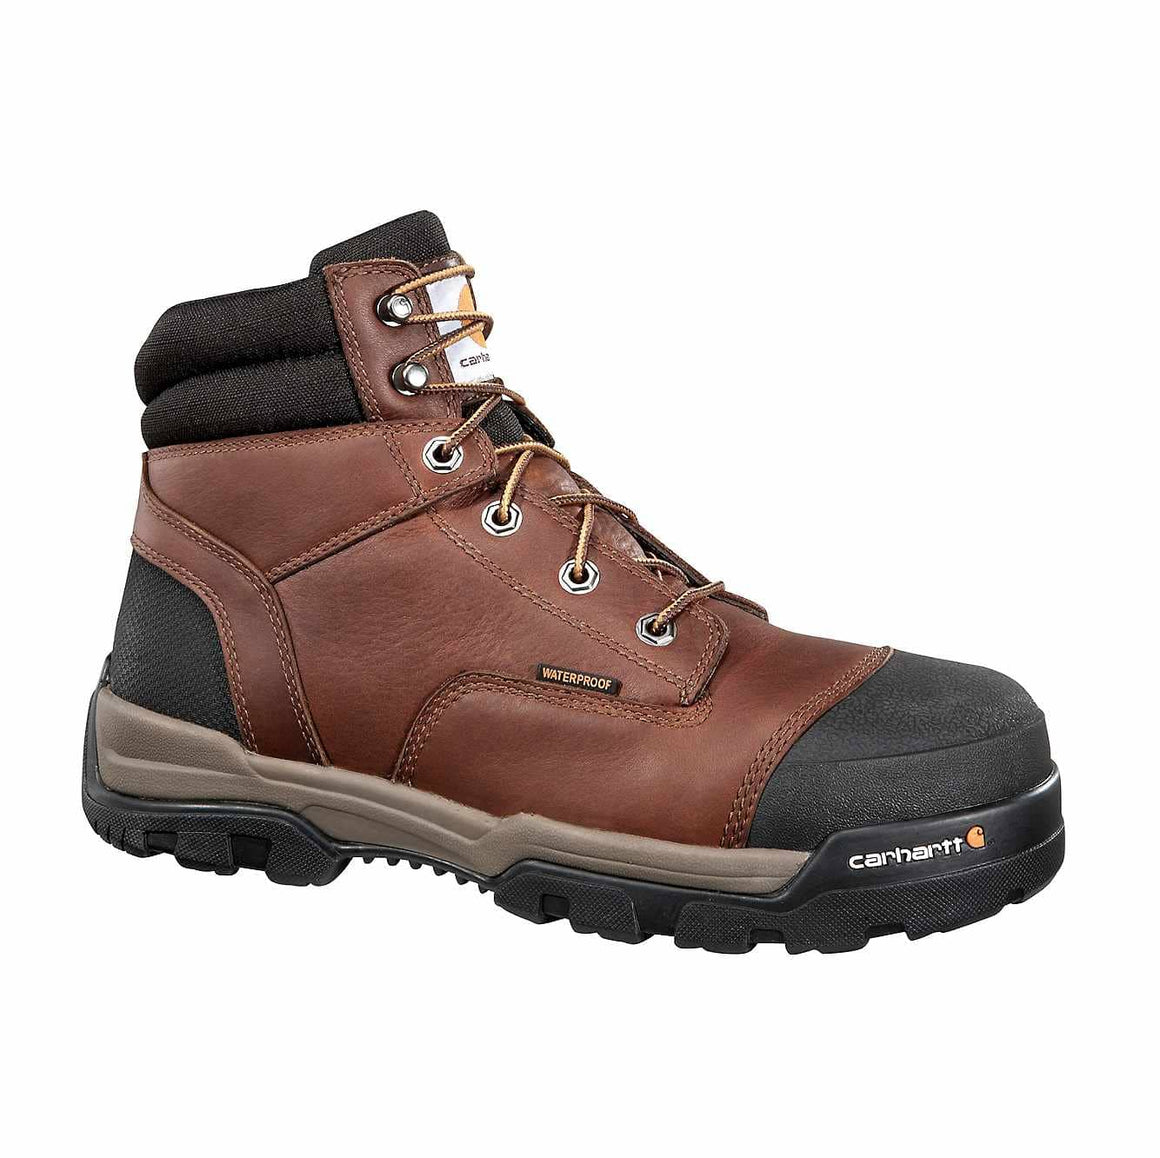 Carhartt Men's 6 Inch Ground Force Work Boot Safety-Toe - CME6355 - ShoeShackOnline